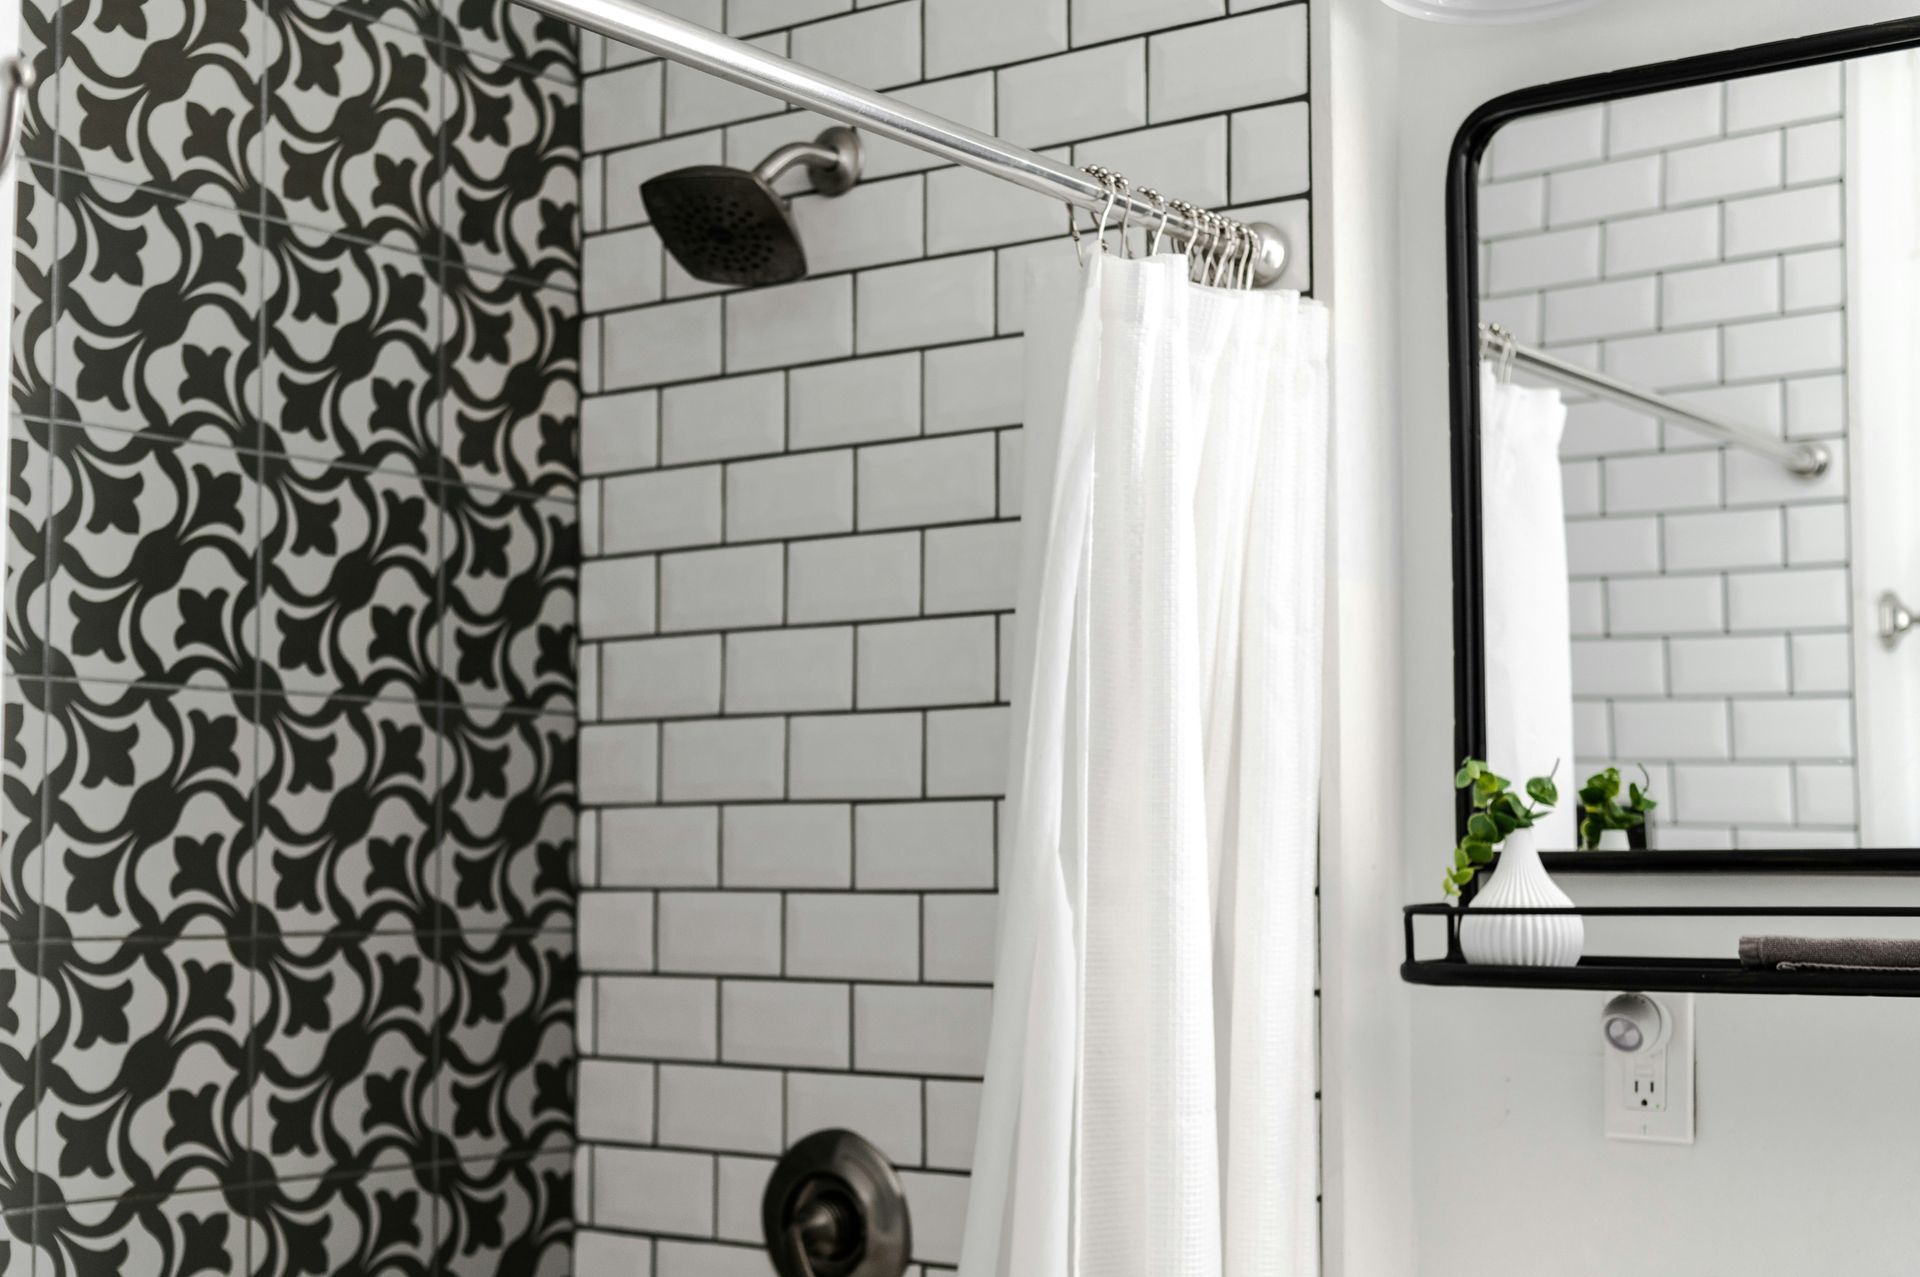 A bathroom with white tiles, a shower curtain, a mirror, and a vase.